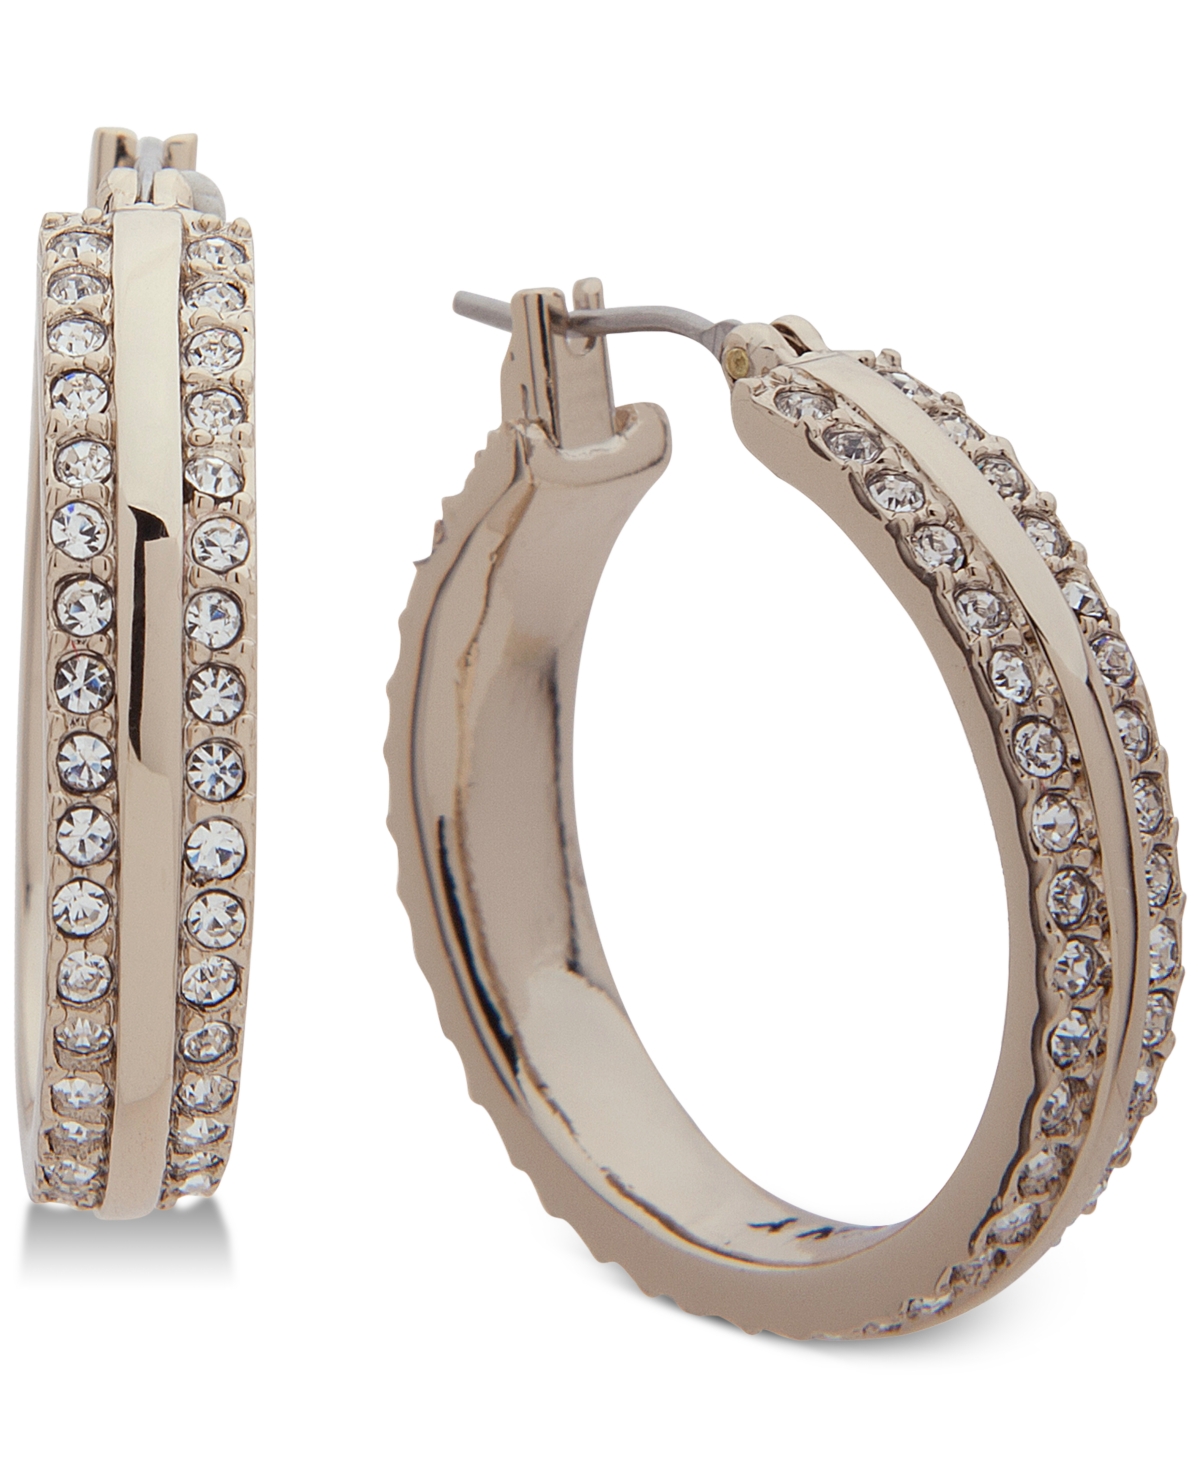 "Small Gold-Tone Pave Small Hoop Earrings 1" - Gold